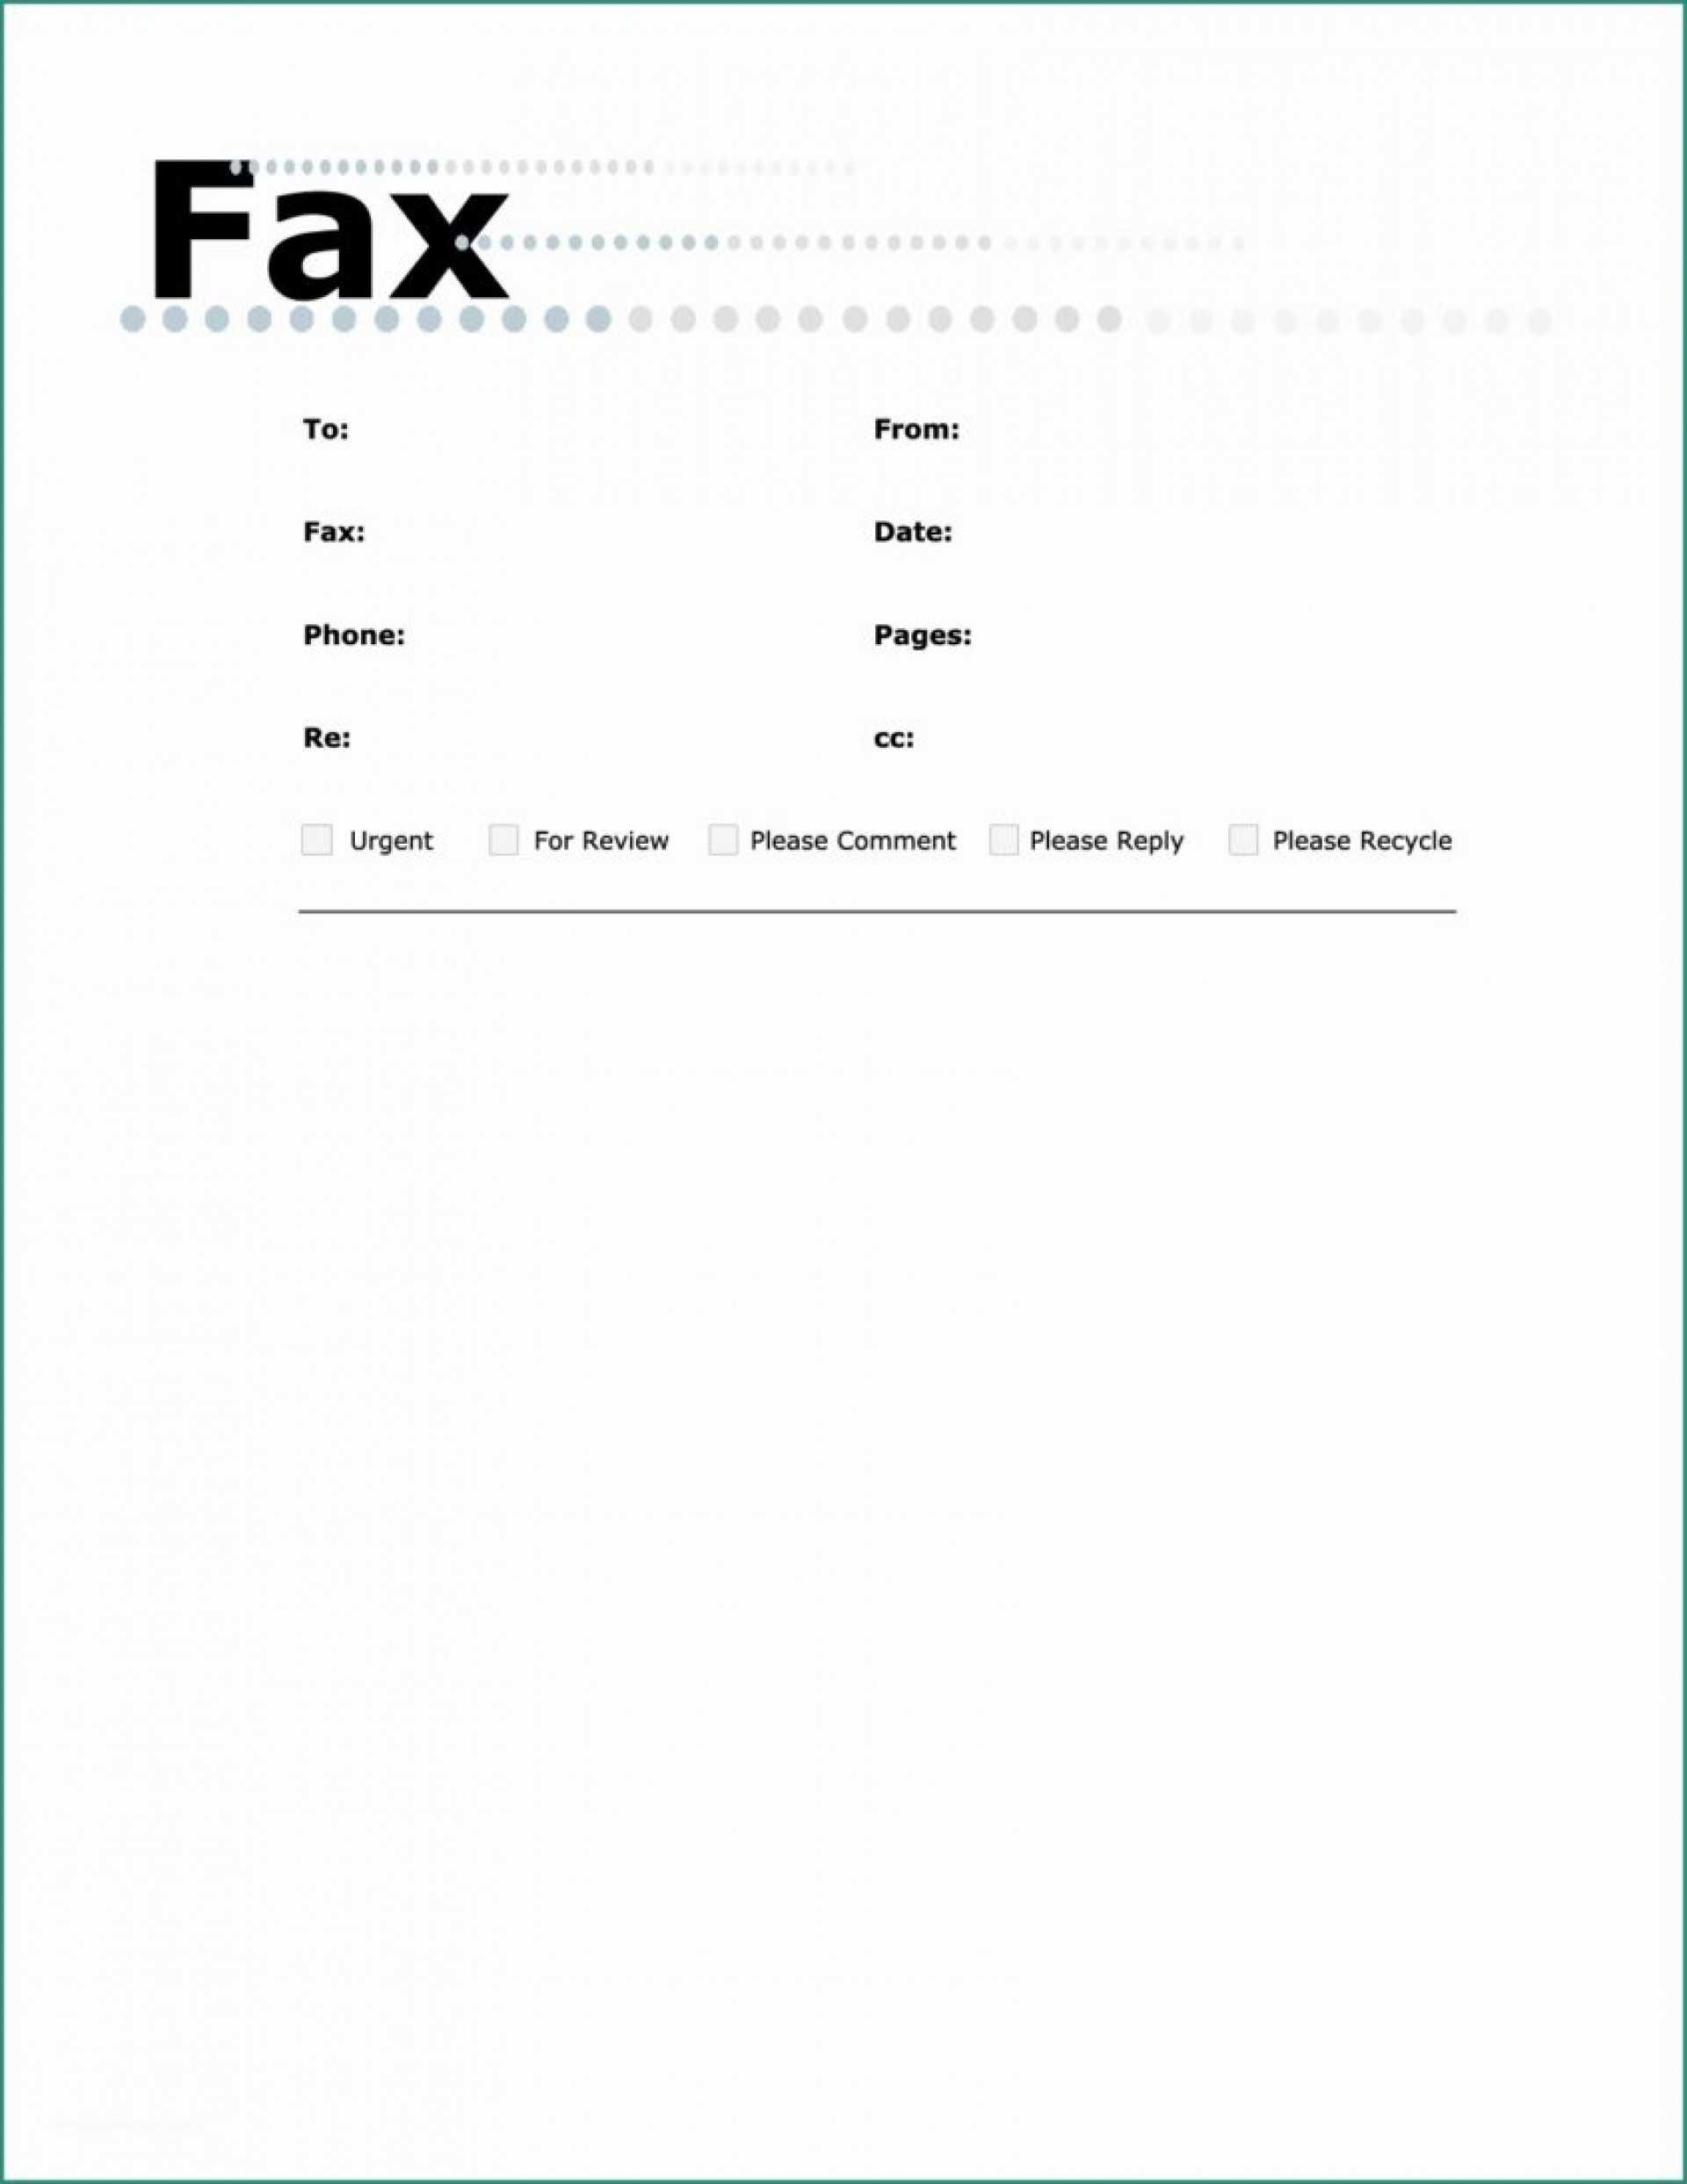 Basic Fax Cover Sheet Sample Pdf Free – Howwikipediaworks Inside Fax Cover Sheet Template Word 2010